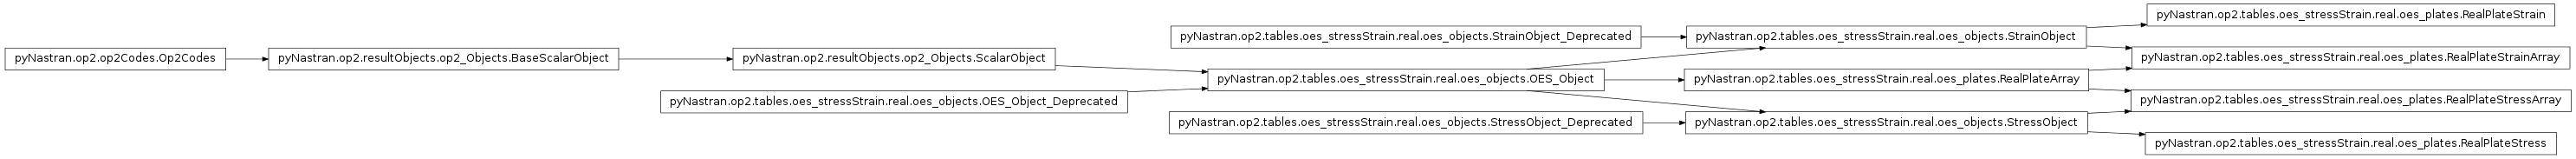 Inheritance diagram of pyNastran.op2.tables.oes_stressStrain.real.oes_plates